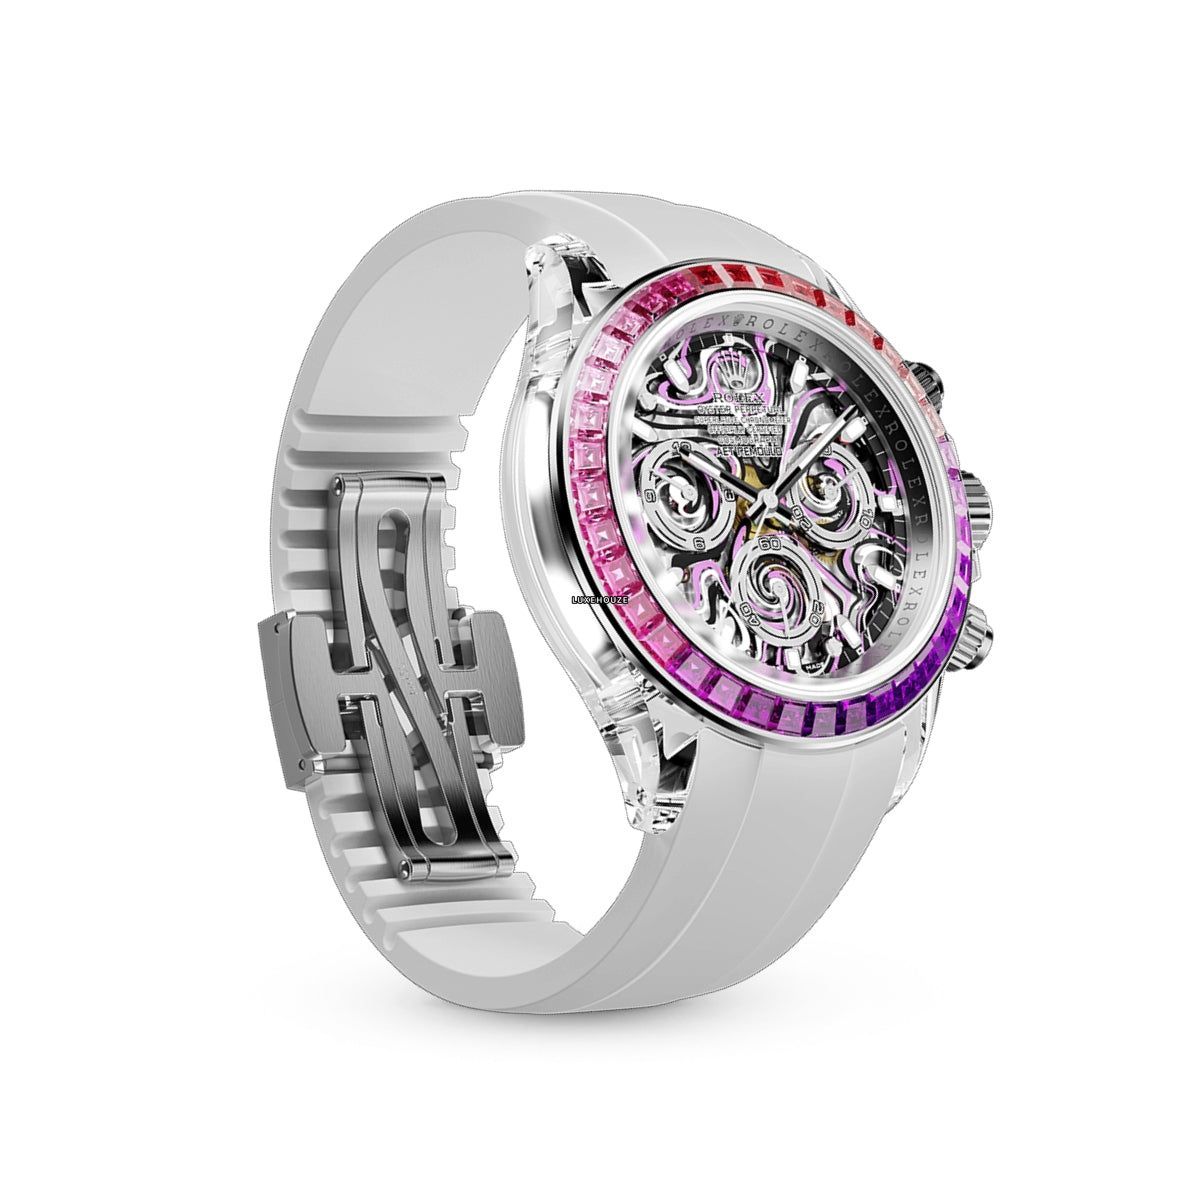 AET Remould Genesis Collection Daytona - Nebula Gemstone Sapphire (Limited Edition of 3 Pieces)